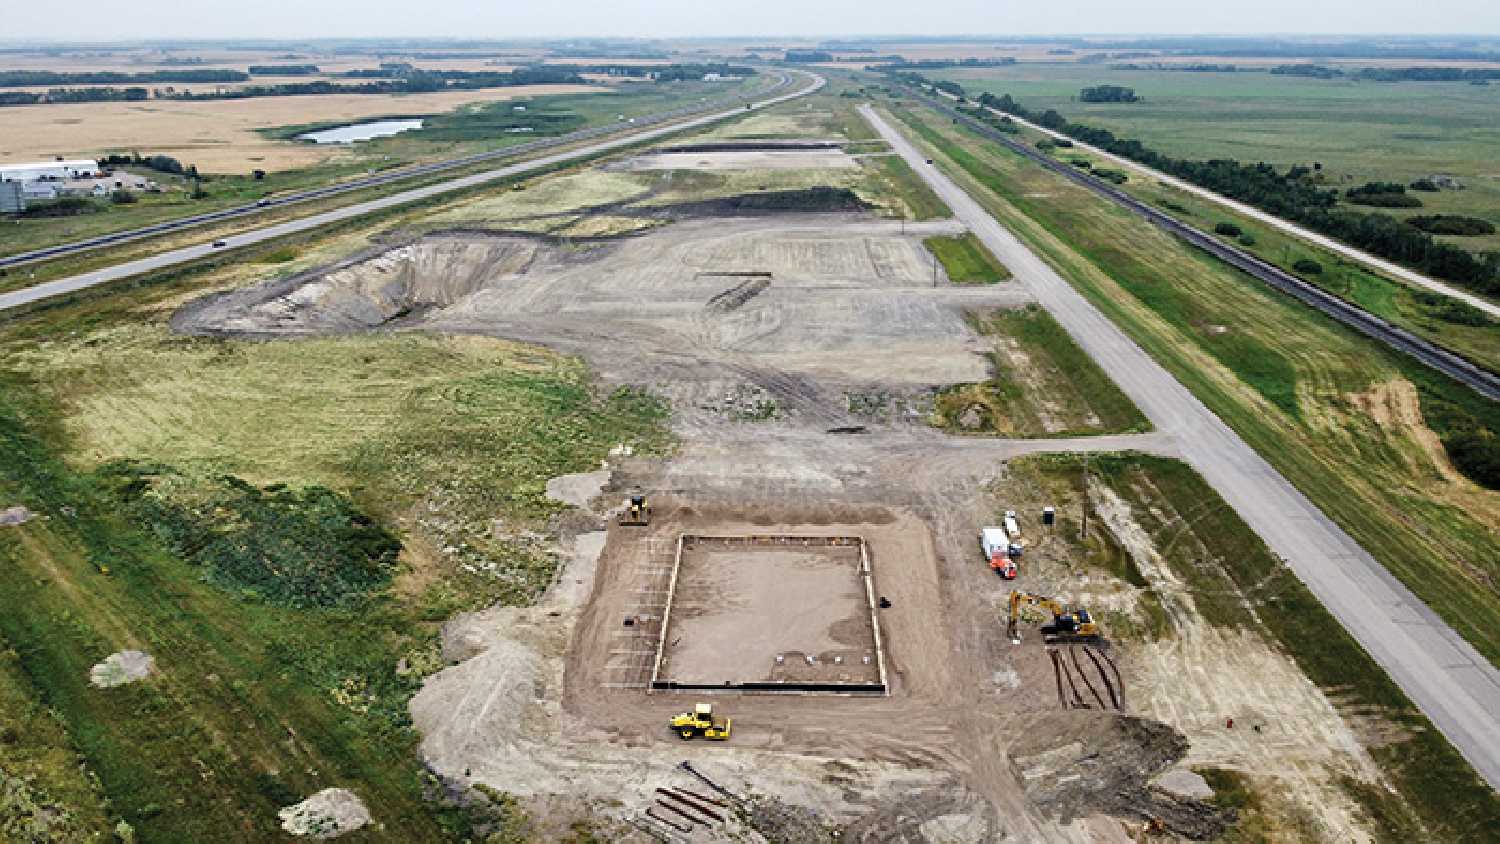 Four construction projects are under way in the RM of Moosomin commercial development just east of the town of Moosomin. From the foreground to the background, the four projects are the RM of Moosomin new shop, with the building footprint beginning to be visible (Lot 1), Johnson’s Grain – (Lot 2,3&4), Lot 5 is still for sale, Mantl (Lot 6), Sunny Transport (Lot 7), and lots 8 & 9 are still for sale.